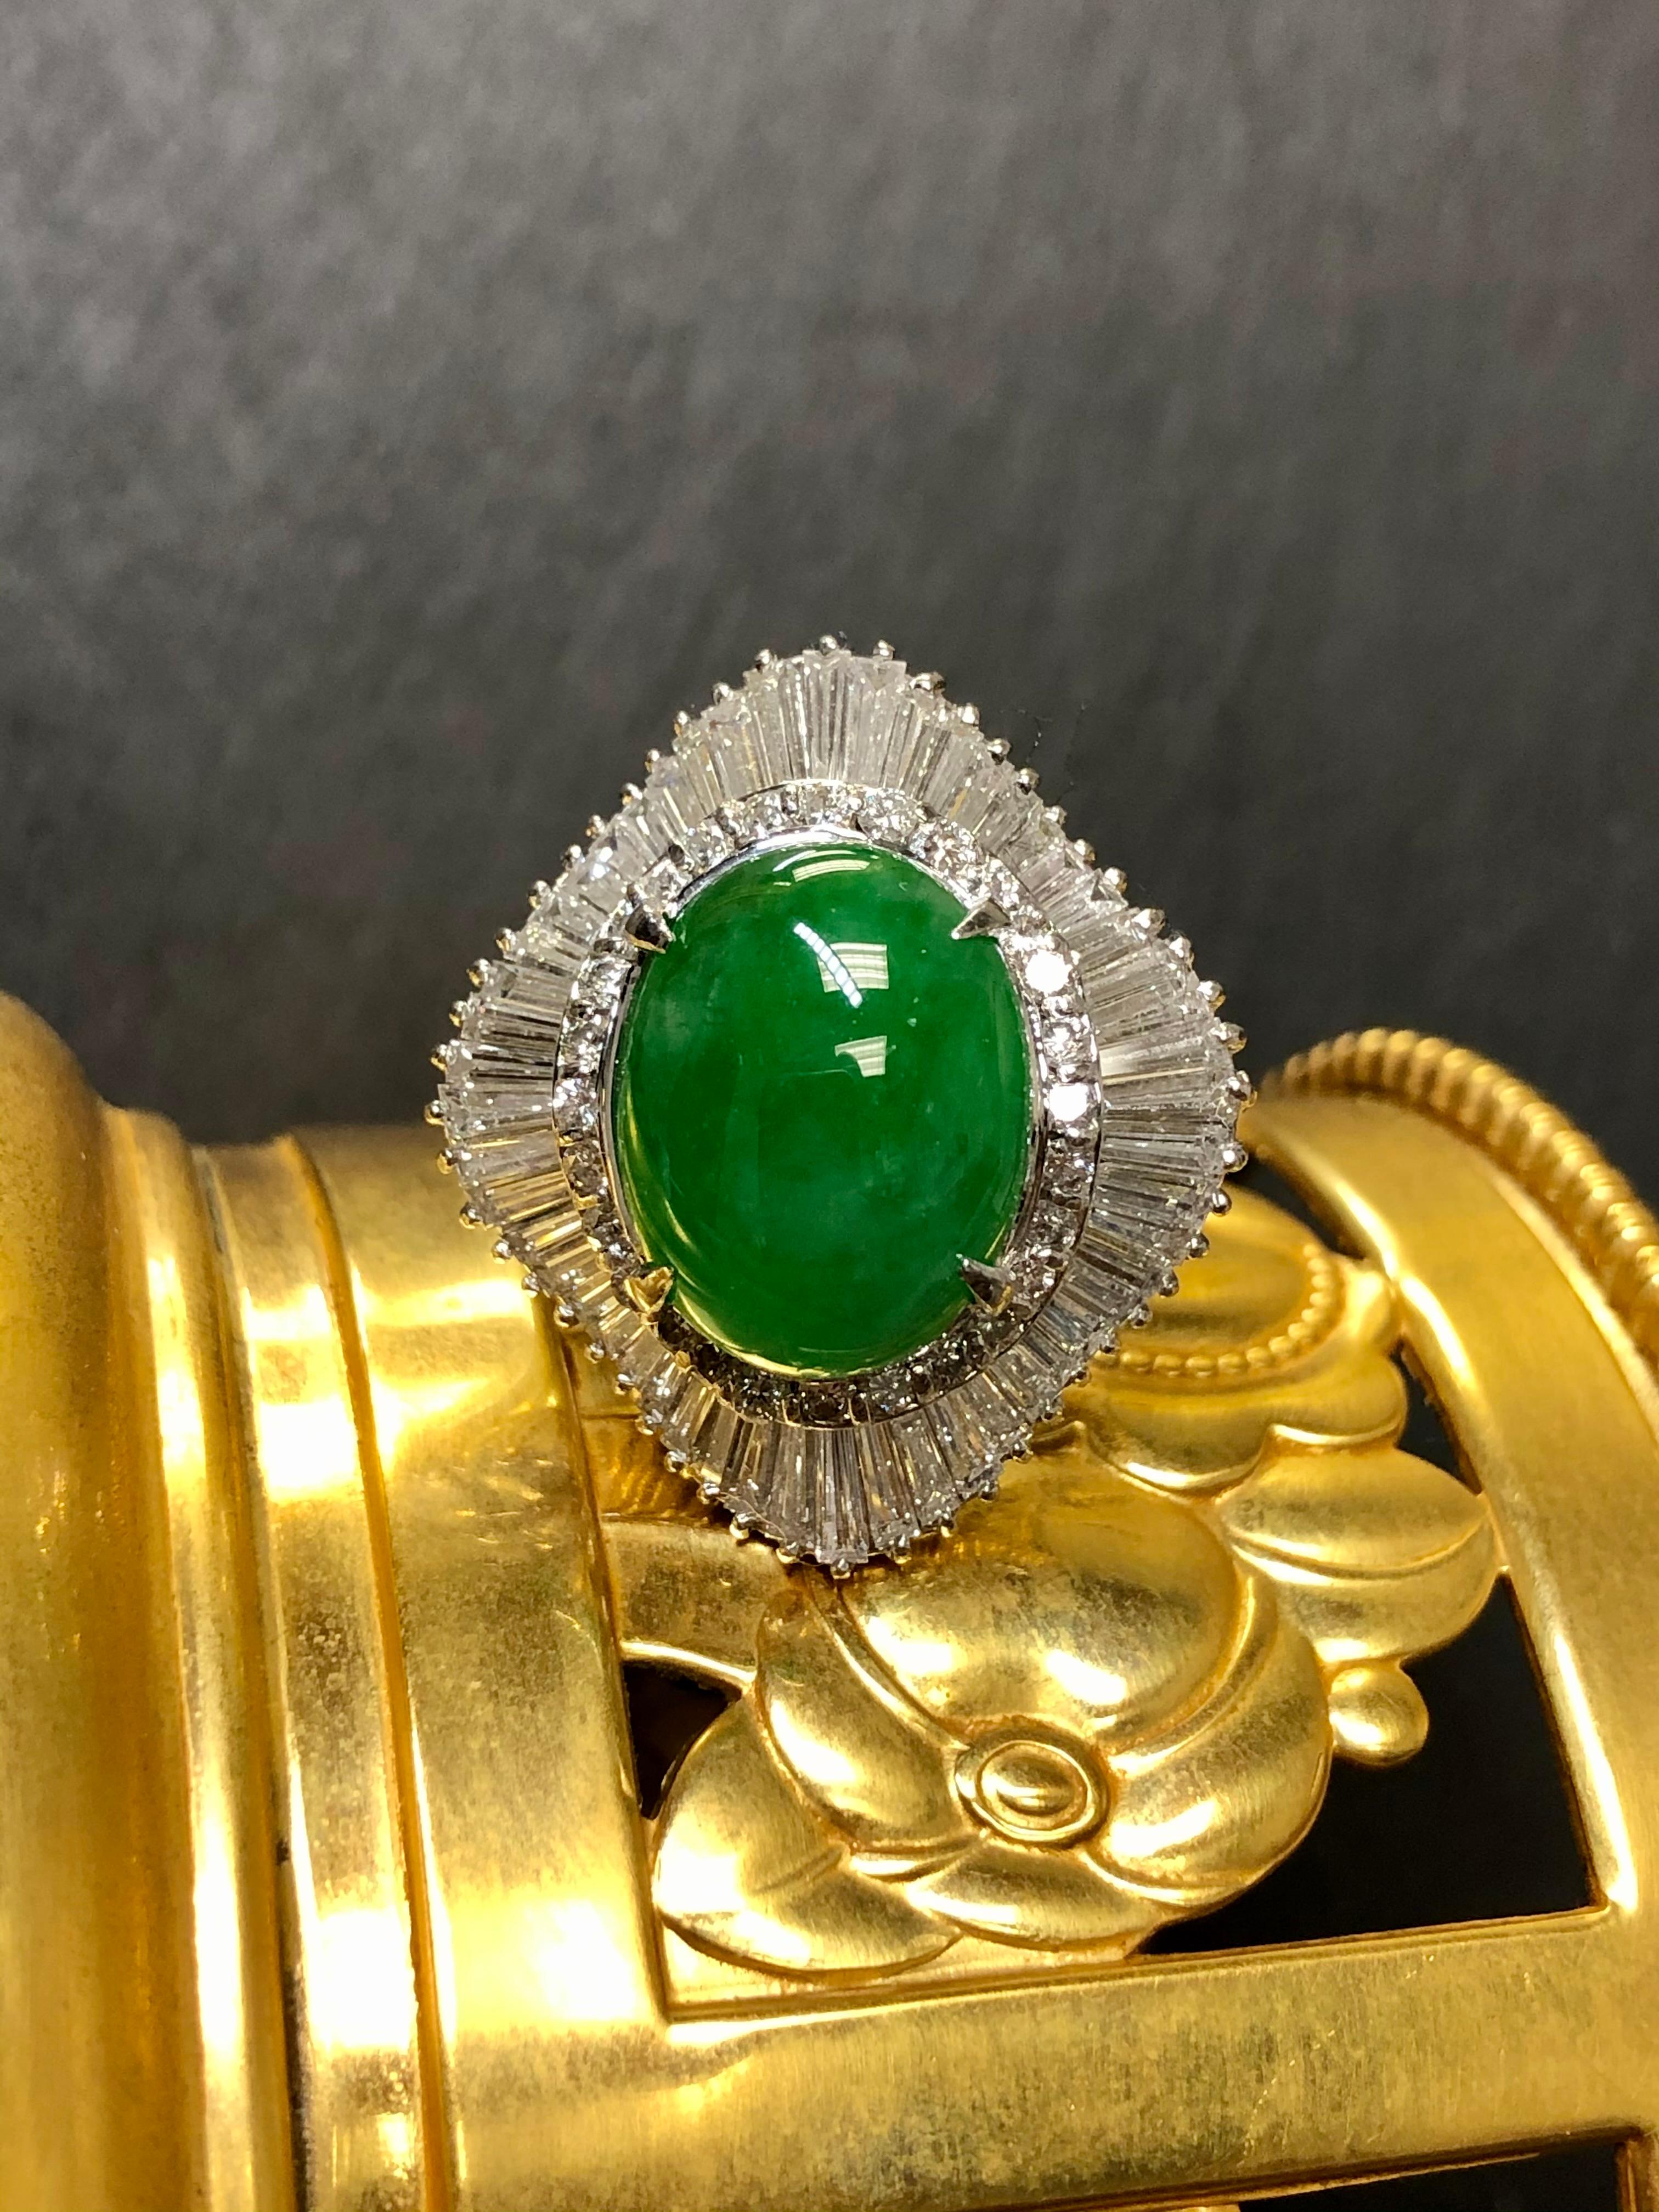 
A fabulous ballerina ring done in platinum centered by a 9.56ct cabochon “A” jade accompanied by a GIA report stating that there is no color treatment. Surrounding the center stone is approximately 4cttw I’m G-I color Vs1-2 clarity round and